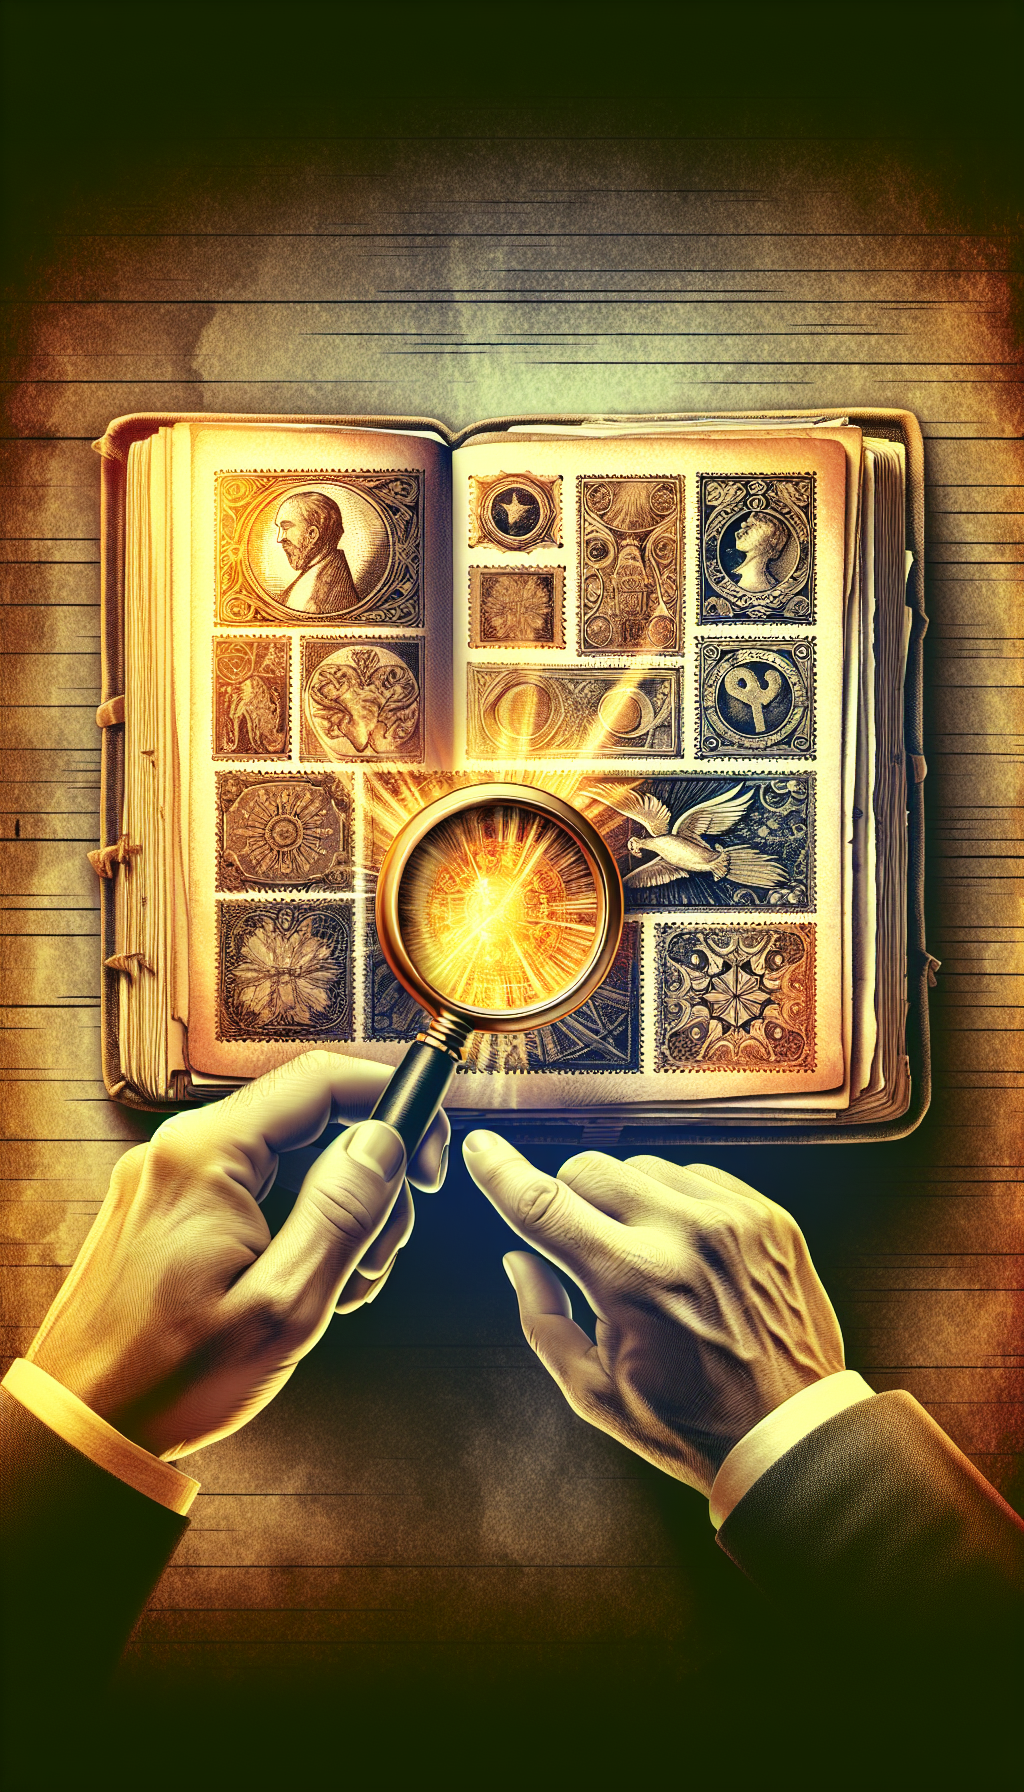 An illustration depicts a magnifying glass held over an open, weathered stamp album, wherein a golden glow spotlights several stamps. These stamps are intricately styled with baroque patterns indicating their worth. The background subtly shifts from sepia-toned edges to vibrant colors at the center, symbolizing the transition from the past to the revealed value through discovery.